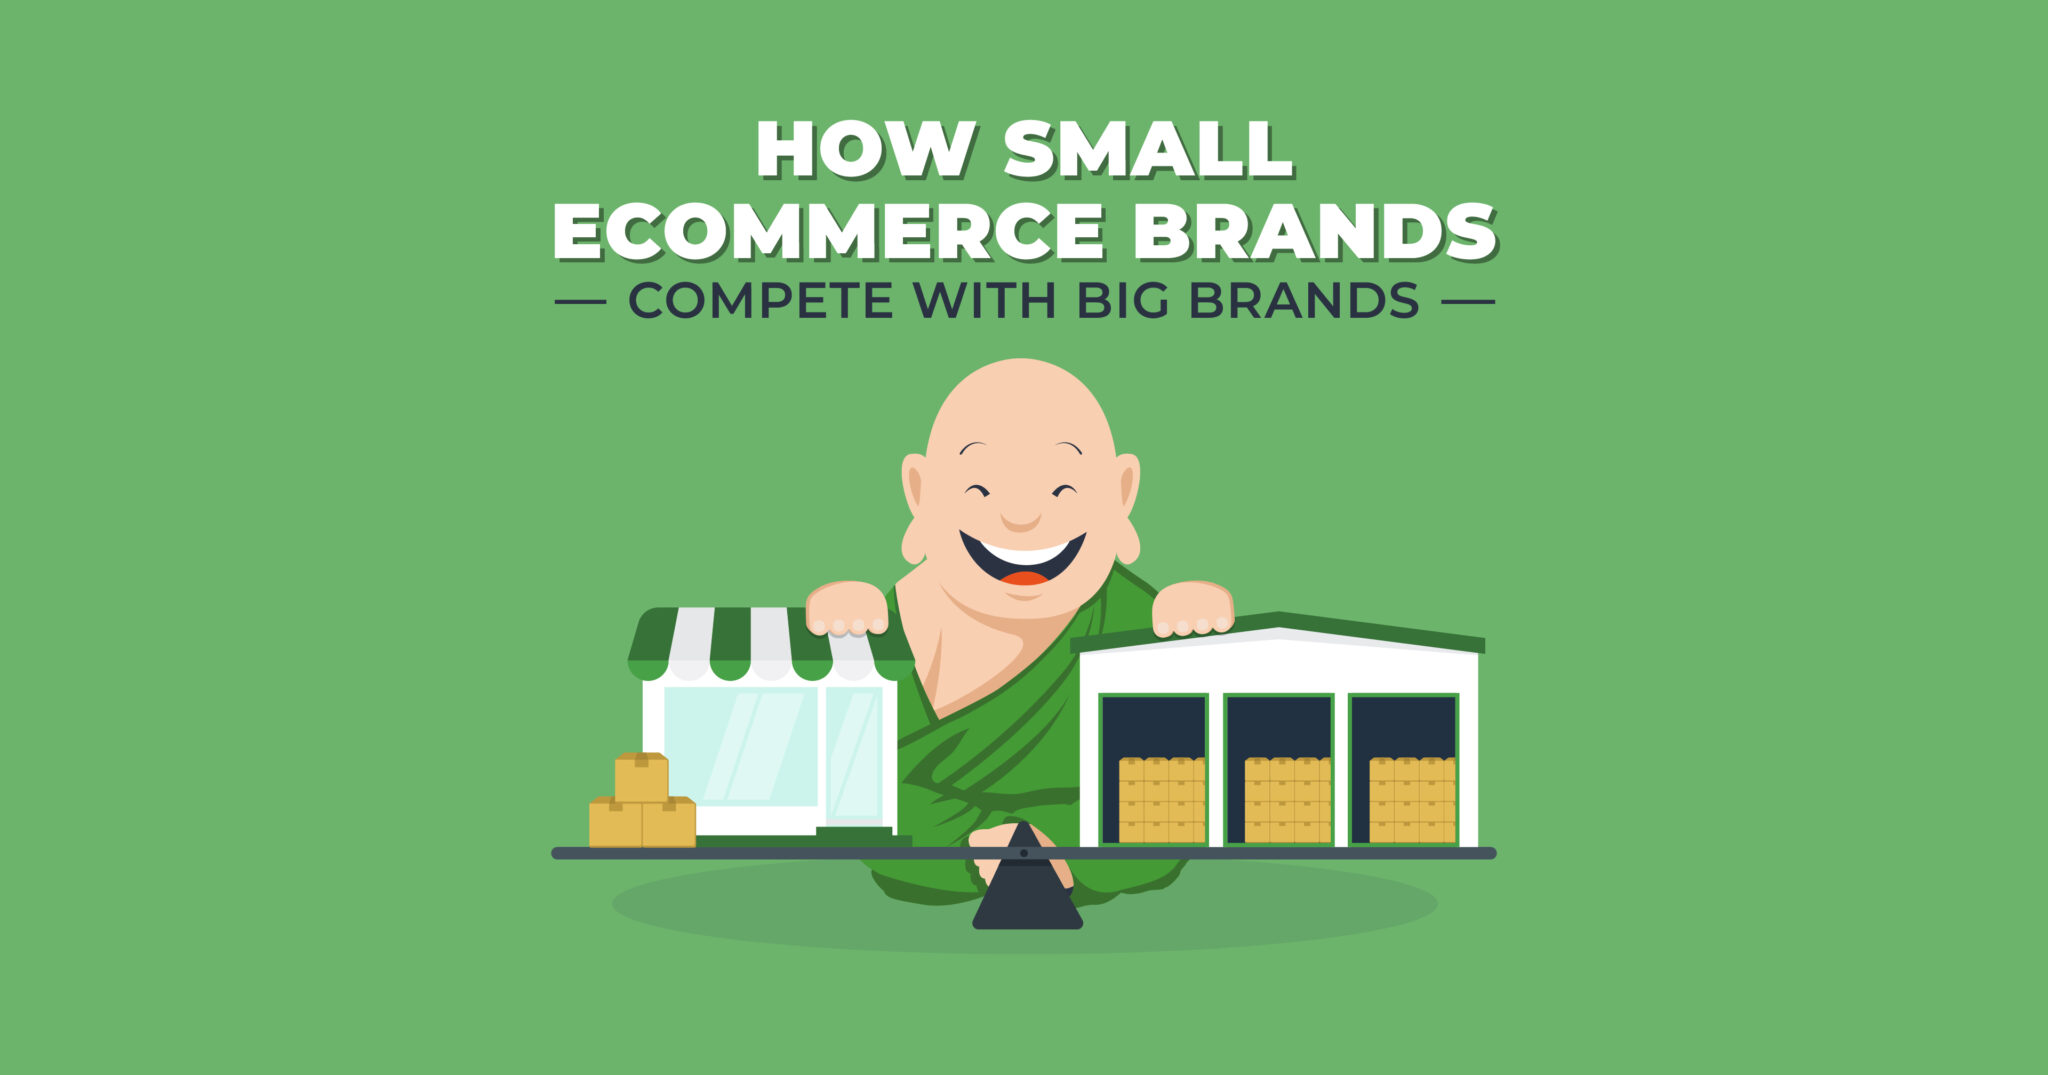 How Small Ecommerce Brands Compete with Big Ecommerce Brands